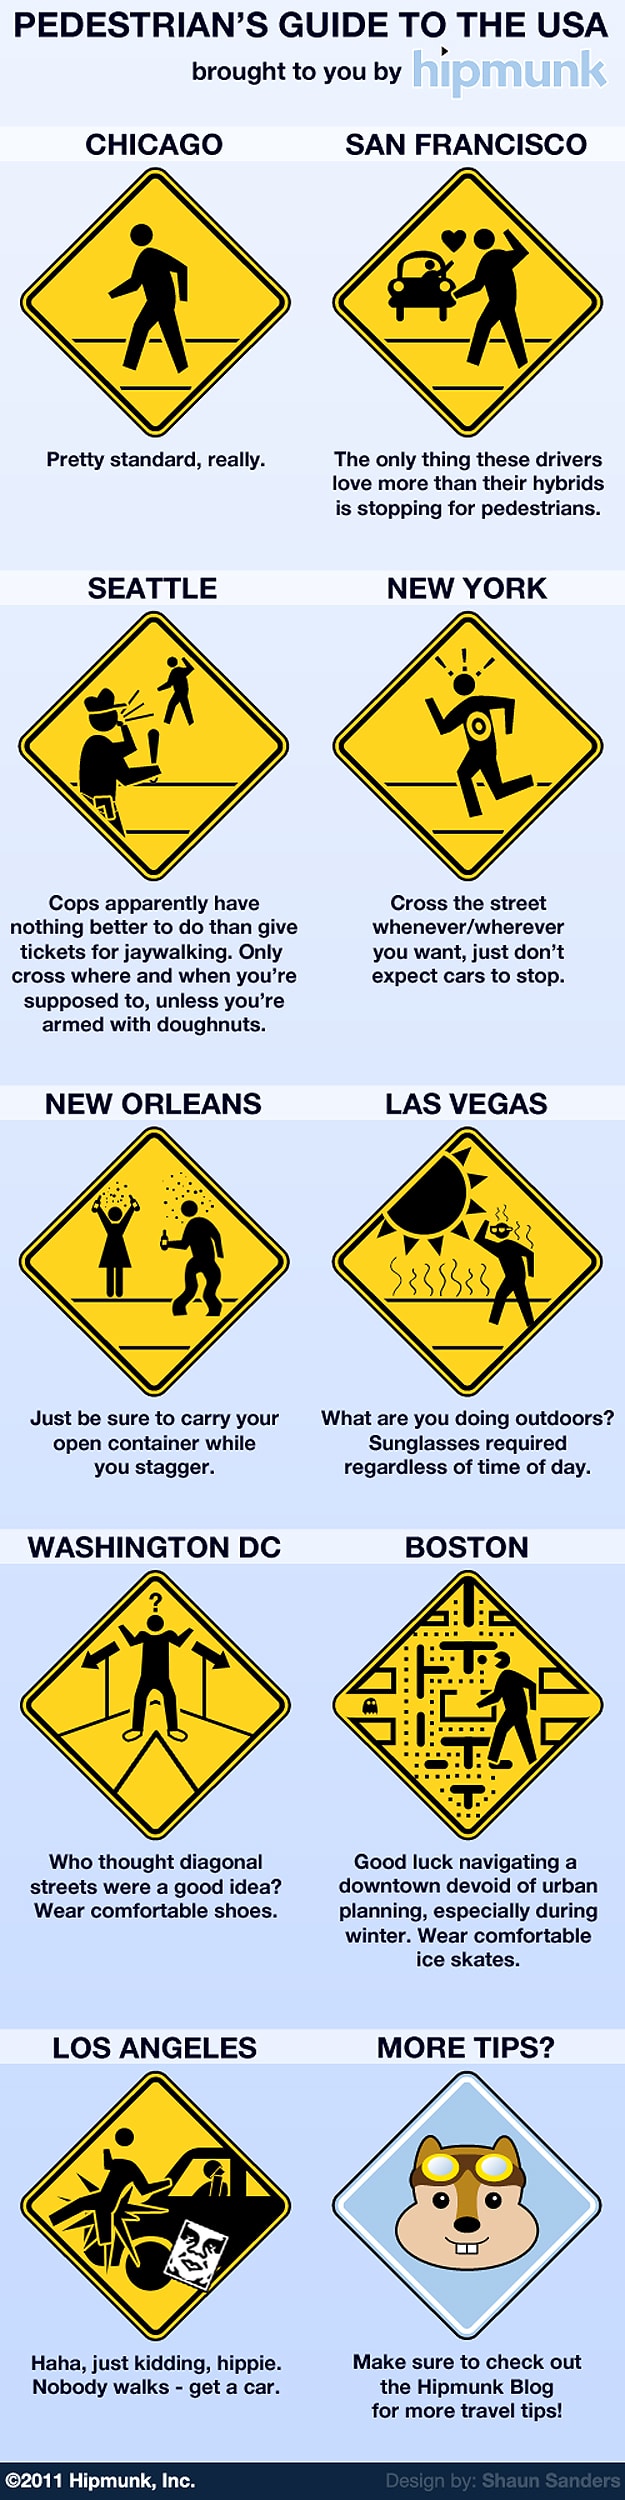 The Pedestrian’s Guide to the USA